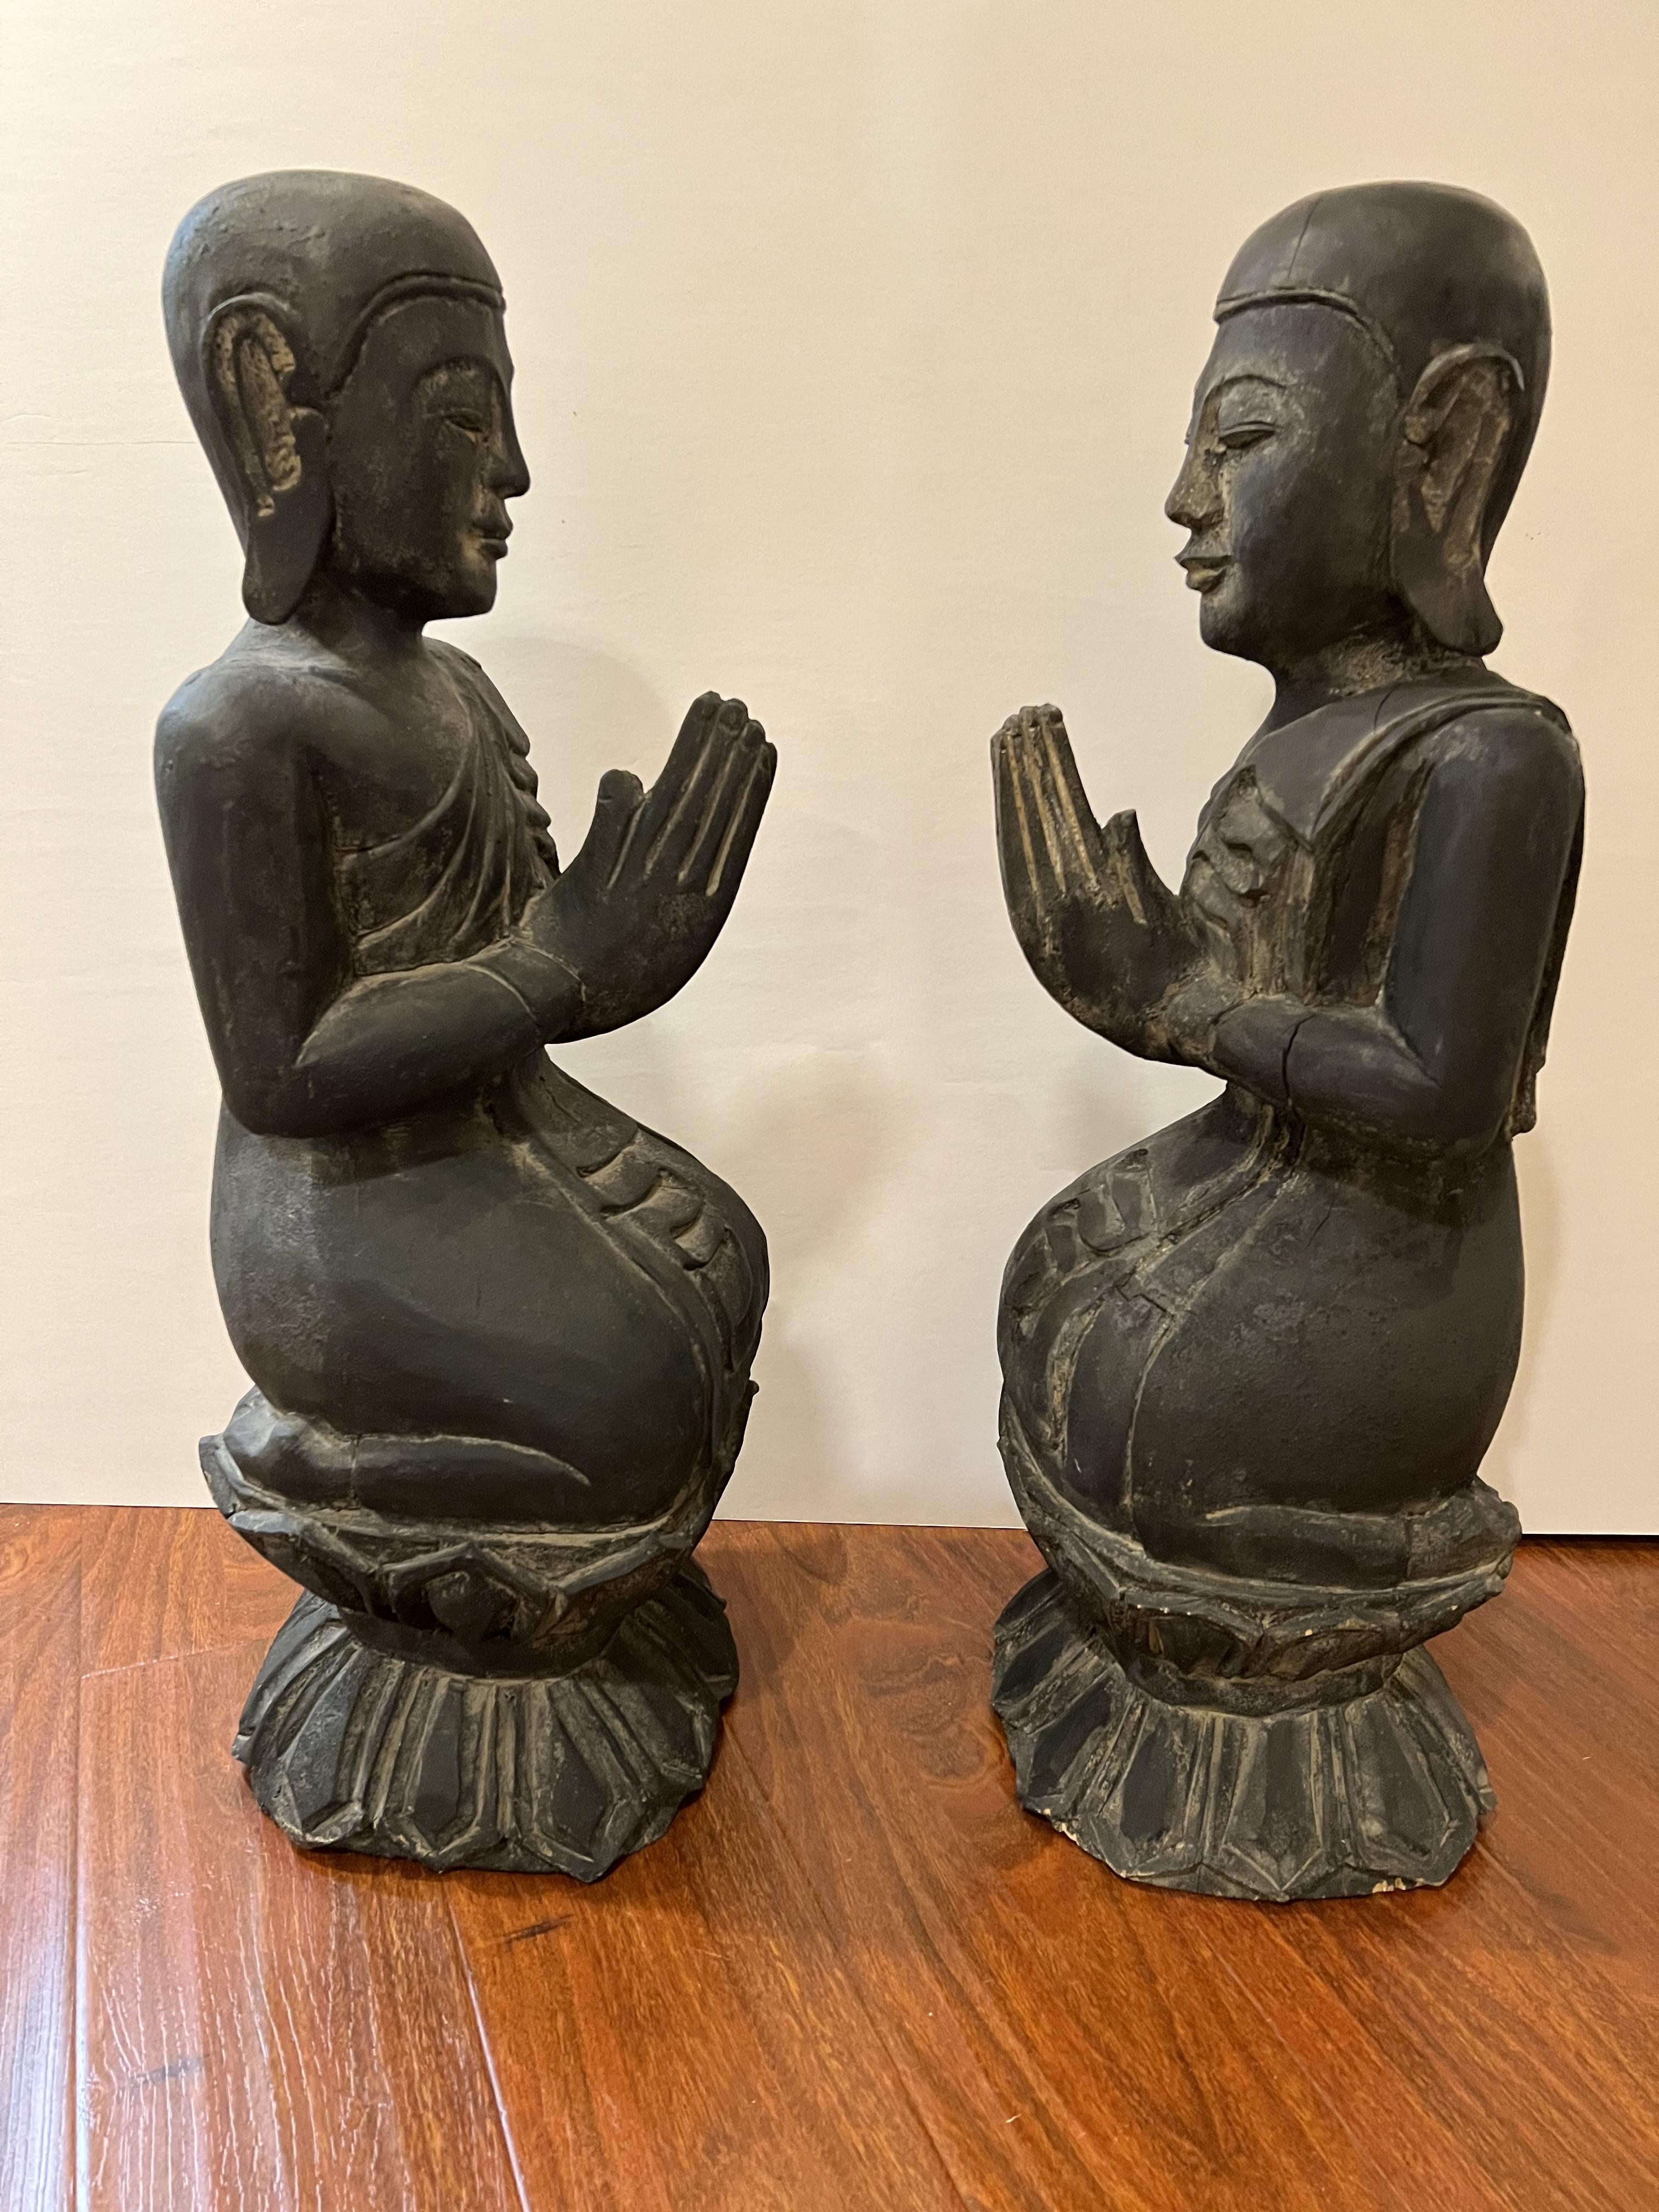 A pair of wooden Buddha sculptures. One is a man, and the other is a woman. 
From my research, this could either be a buddha sculpture or a monk sculpture. 
They are seen to be kneeling and praying on top of an acanthus pedestal. 
They are